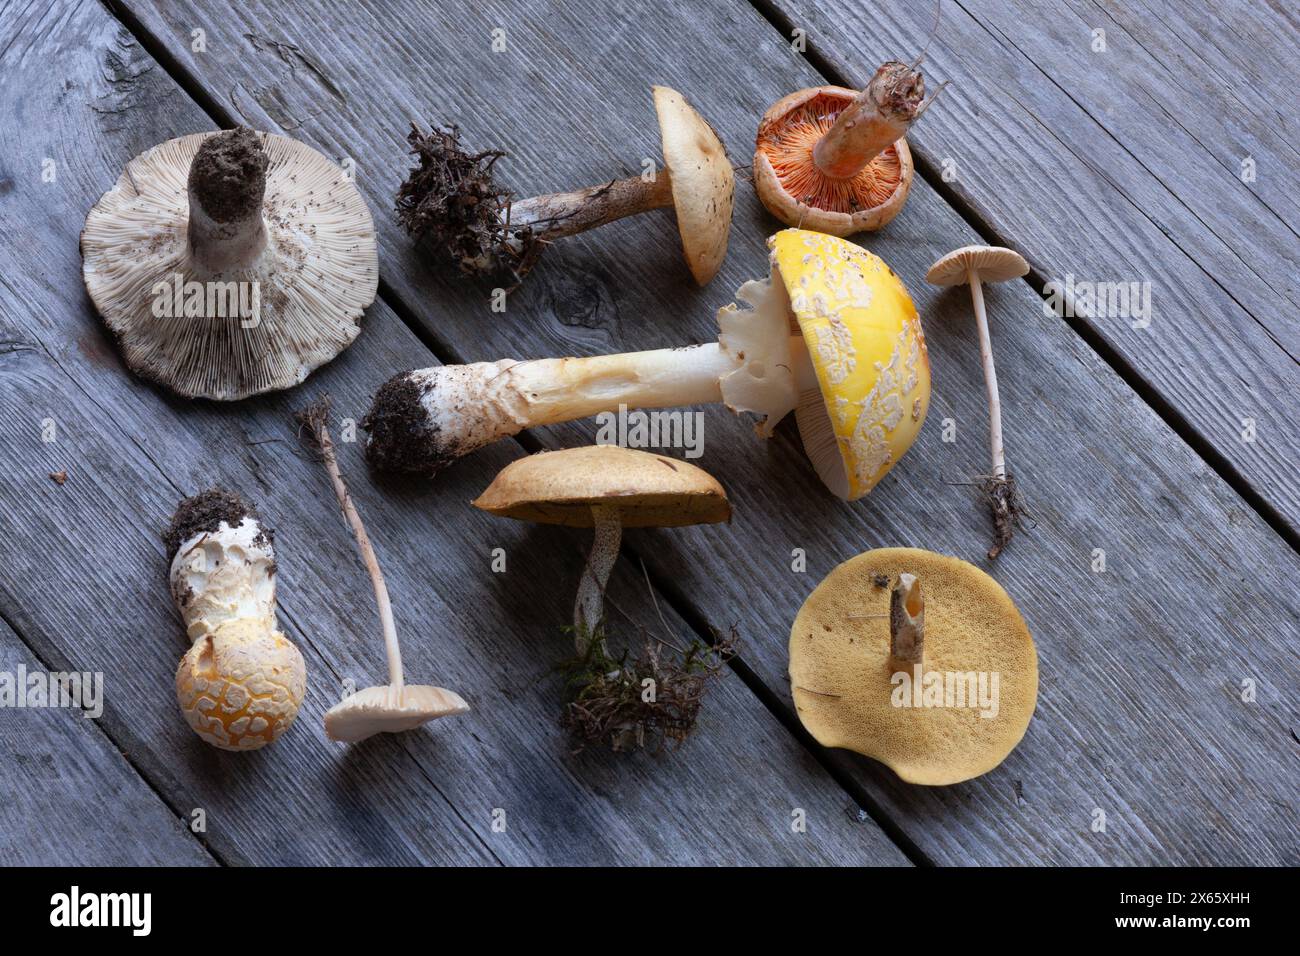 Collection of foraged mushrooms on wooden deck Stock Photo